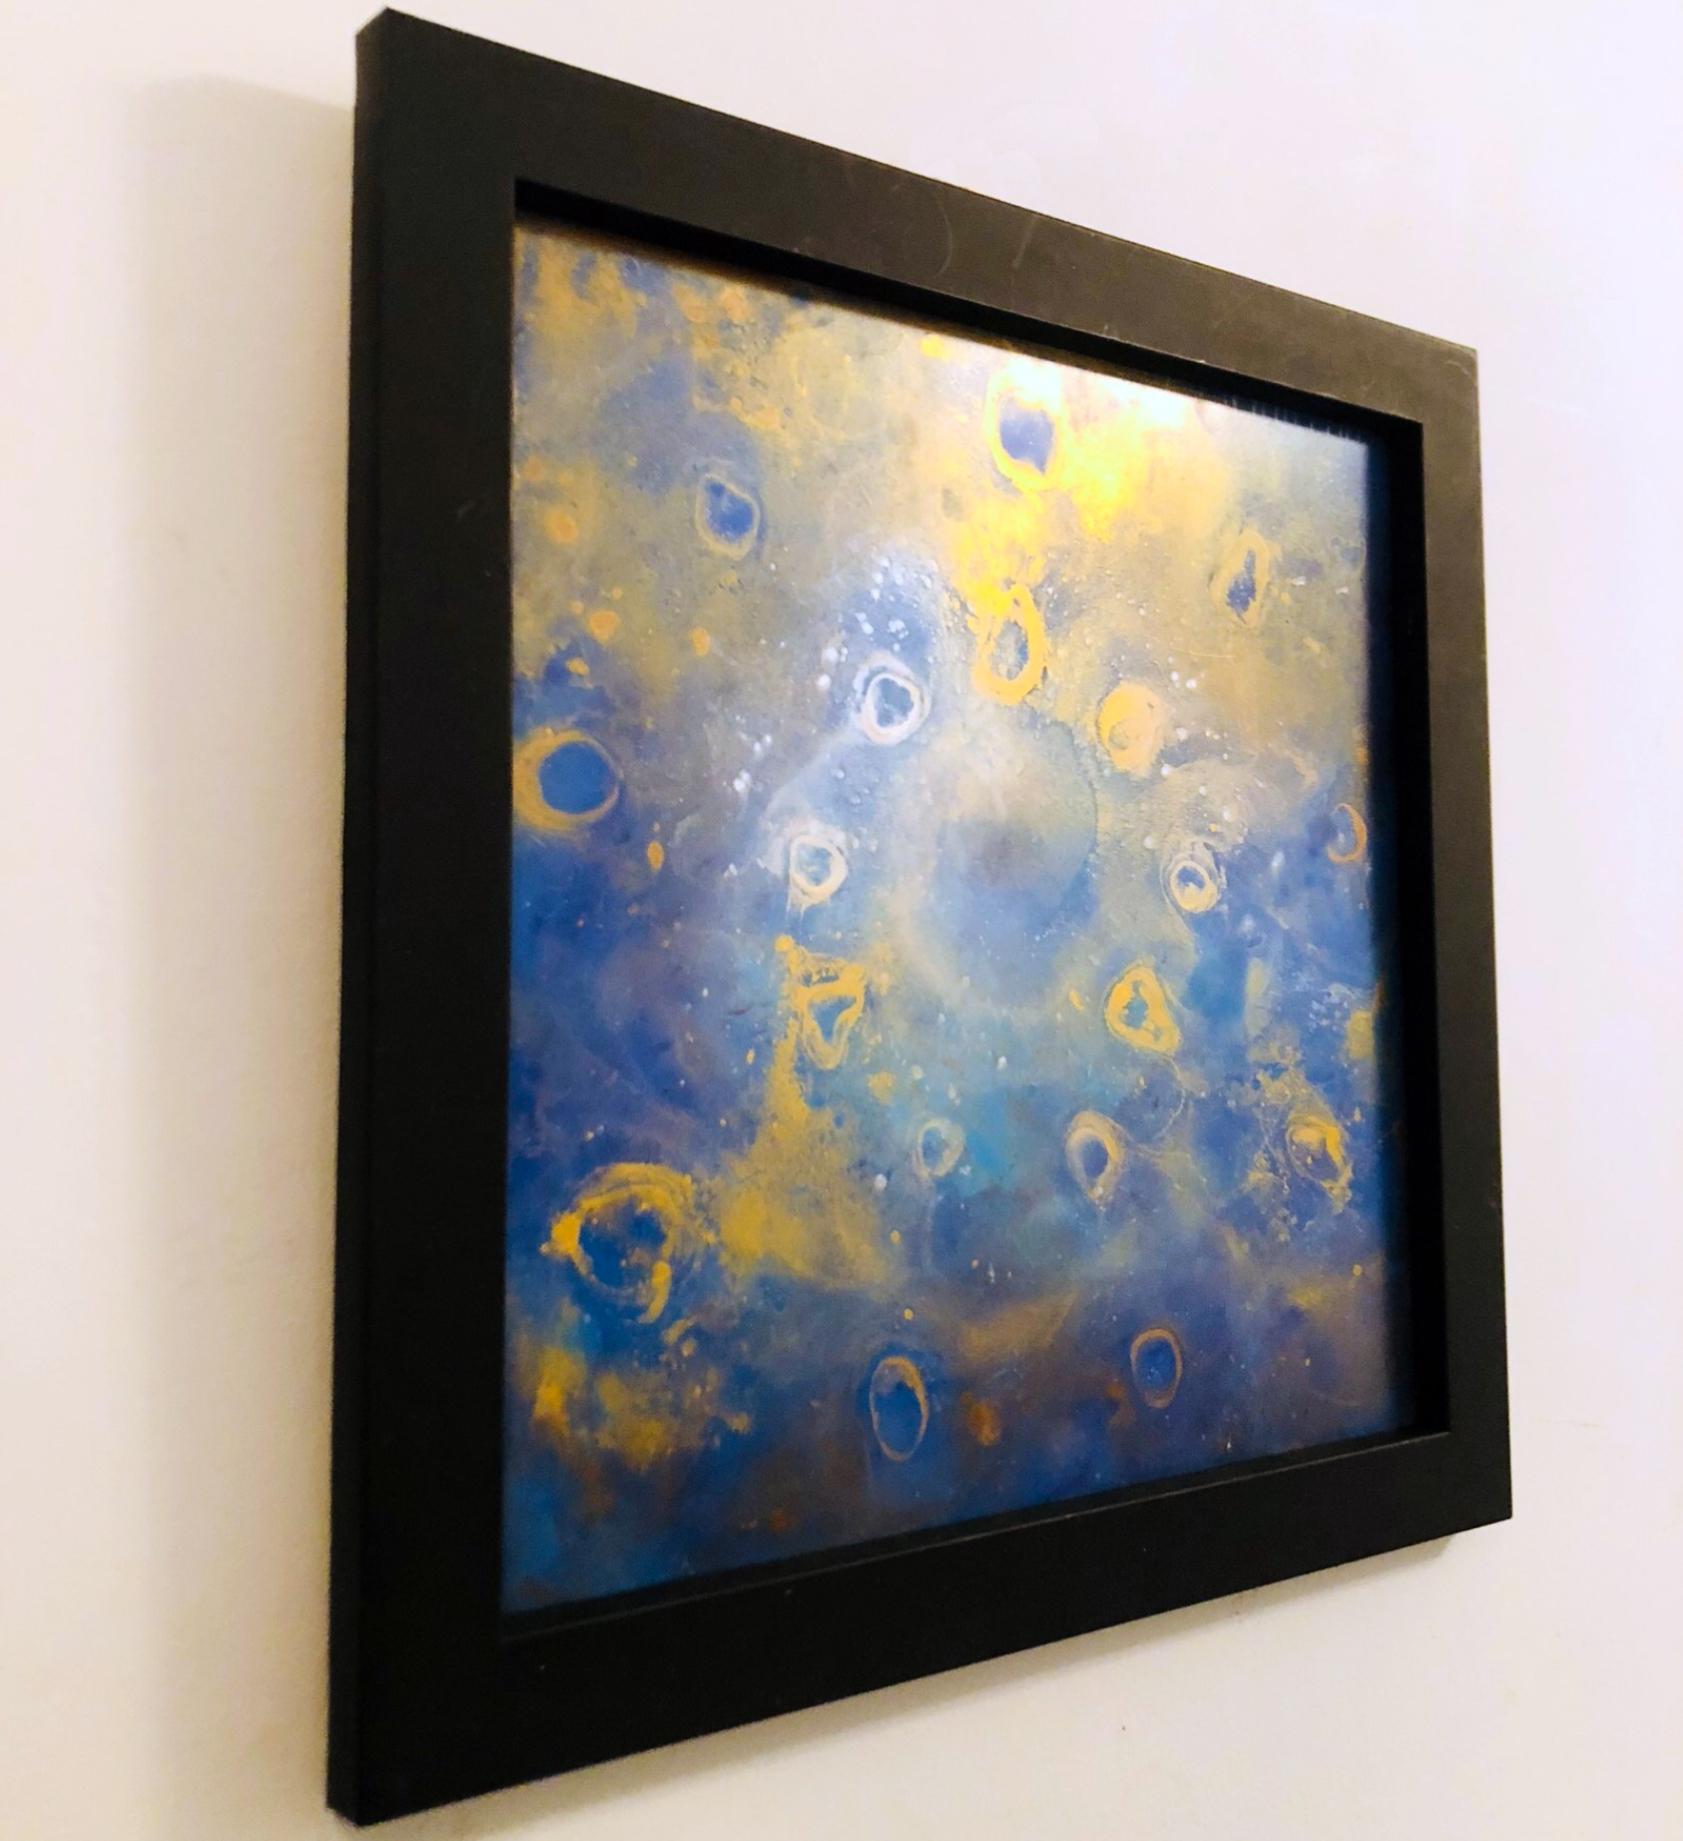 UNDERWATER LIFE oil painting on acrylic glass - gold, blue, framed, 21st century - Abstract Impressionist Painting by Volodymyr Zayichenko